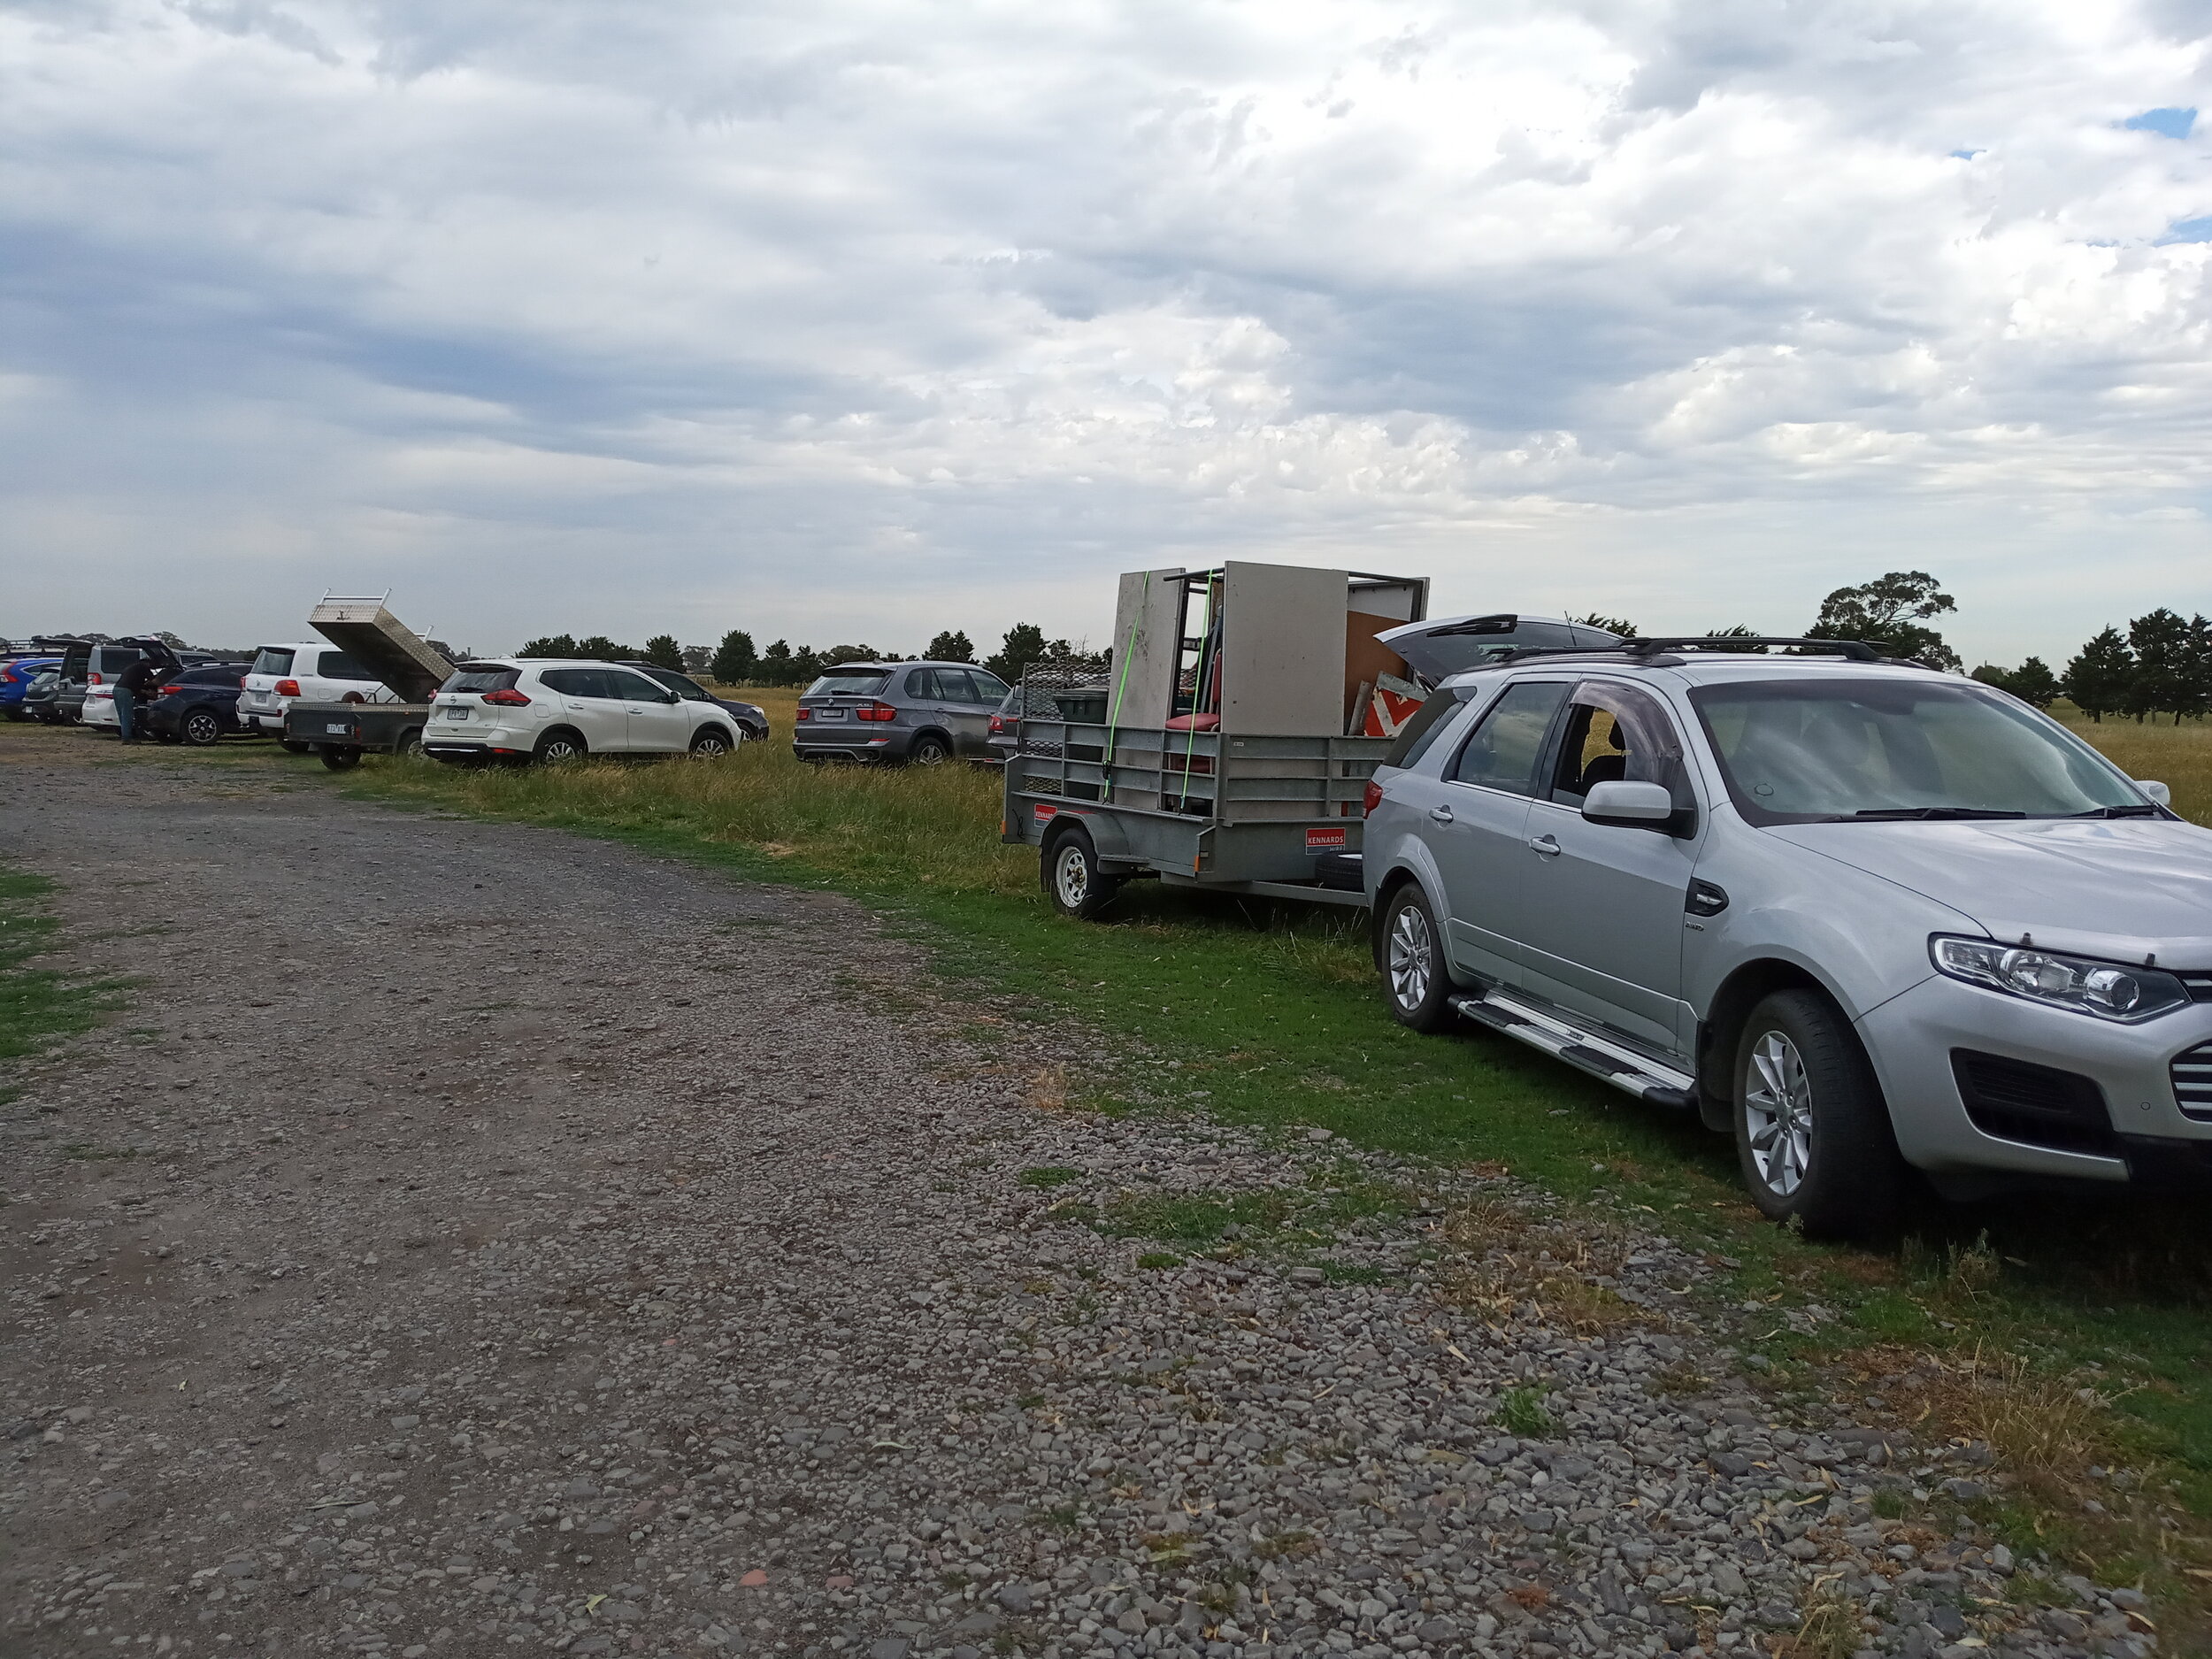  28/11  Shot of some of the cars lined up at the working bee. Bill S’s trailer load of tables, chairs and more in the foreground 